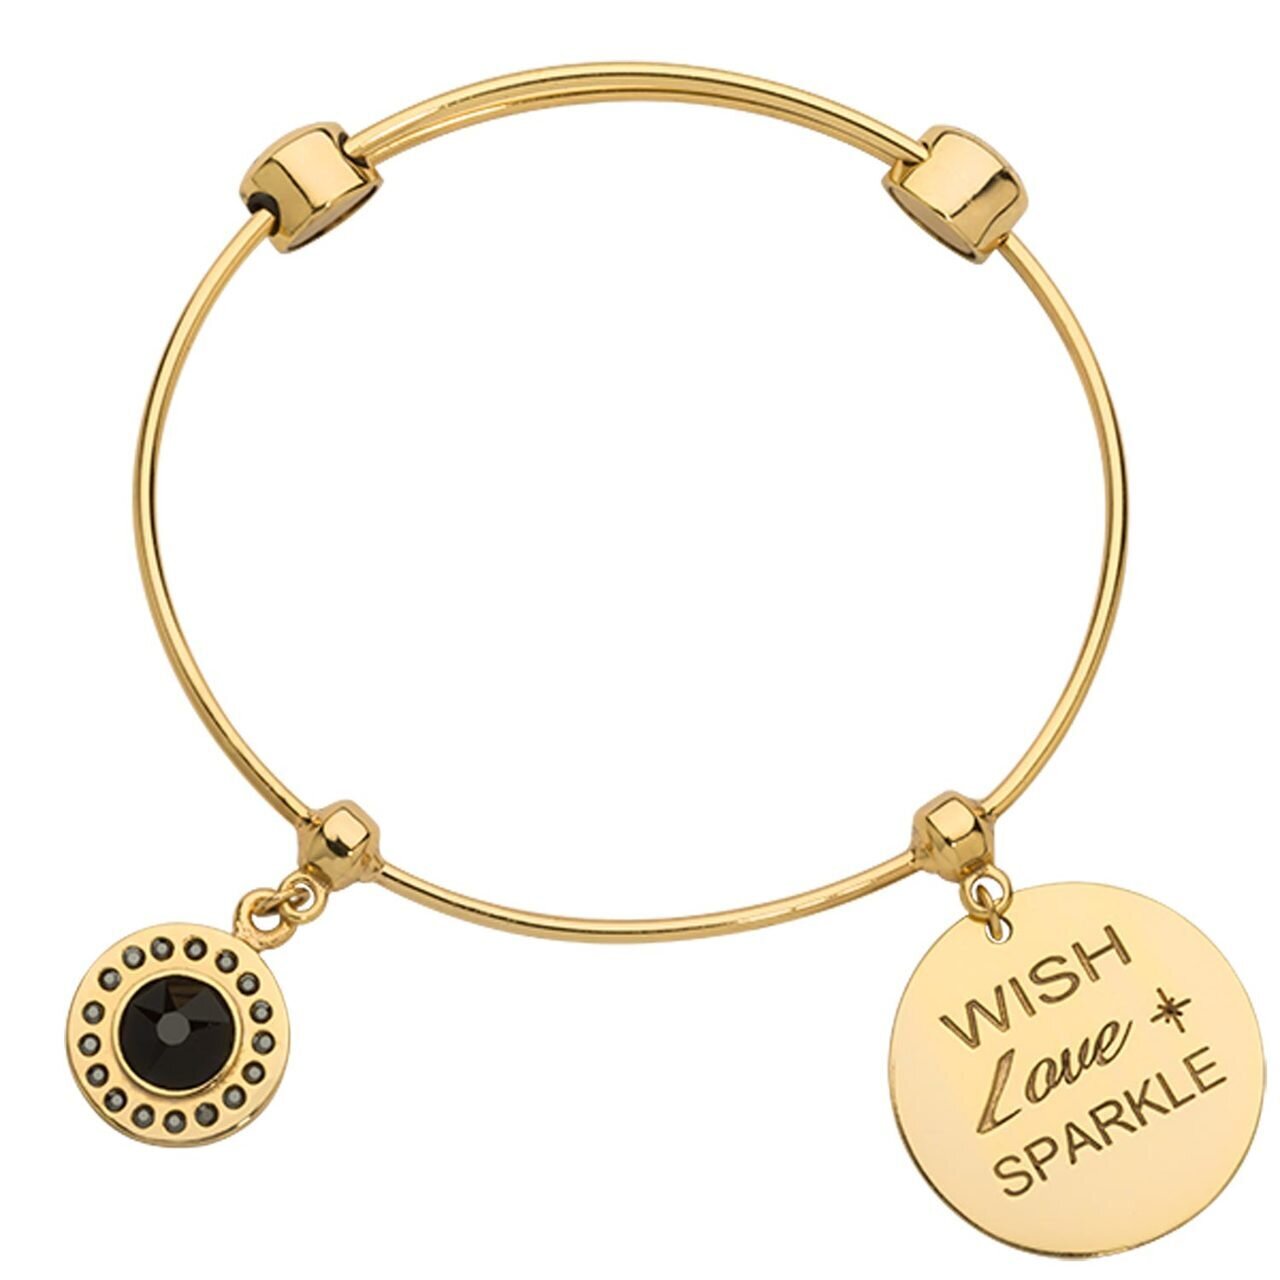 Nikki Lissoni Charm Bangle with Two Fixed Charms Jet Black Wish Love Sparkle Gold-plated 19cm B1142G19